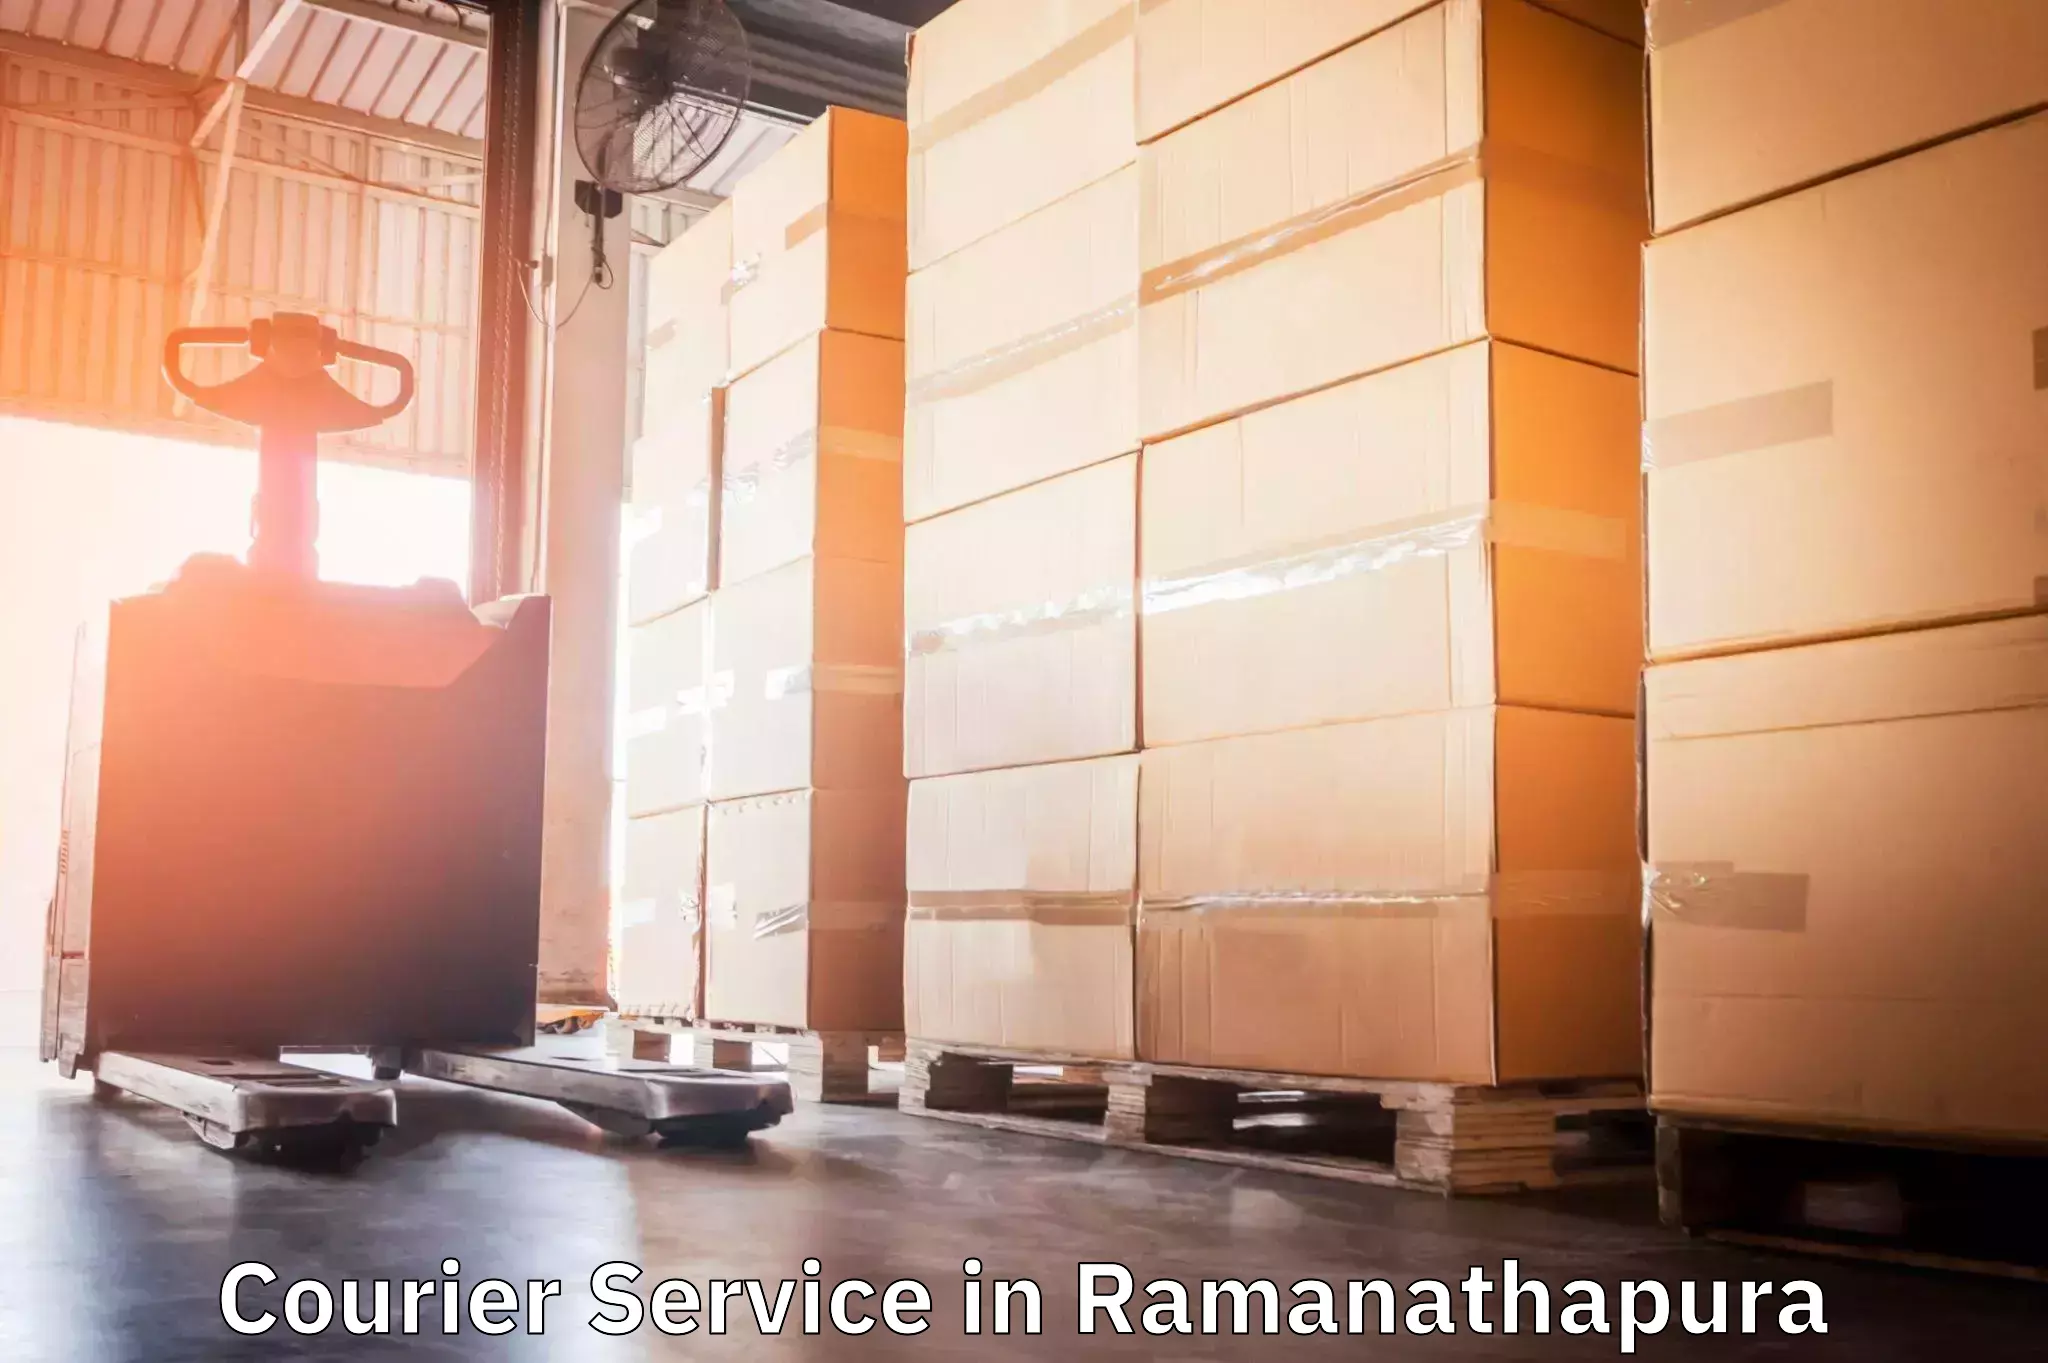 State-of-the-art courier technology in Ramanathapura